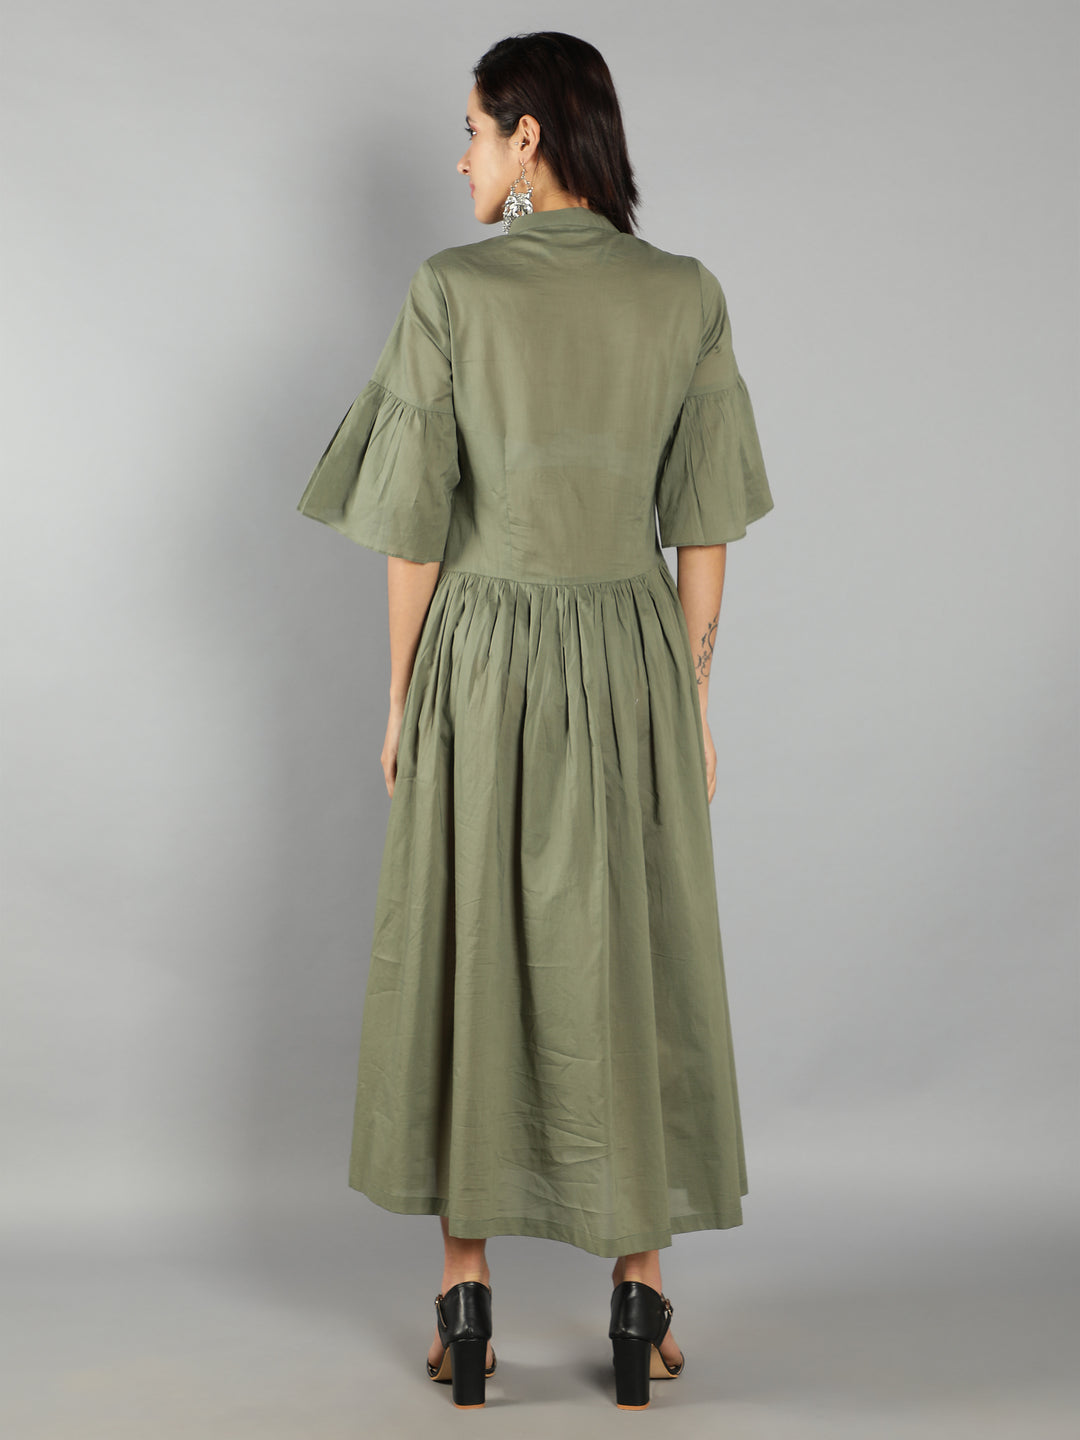 See Designs Green Fit and Flare Women Dress